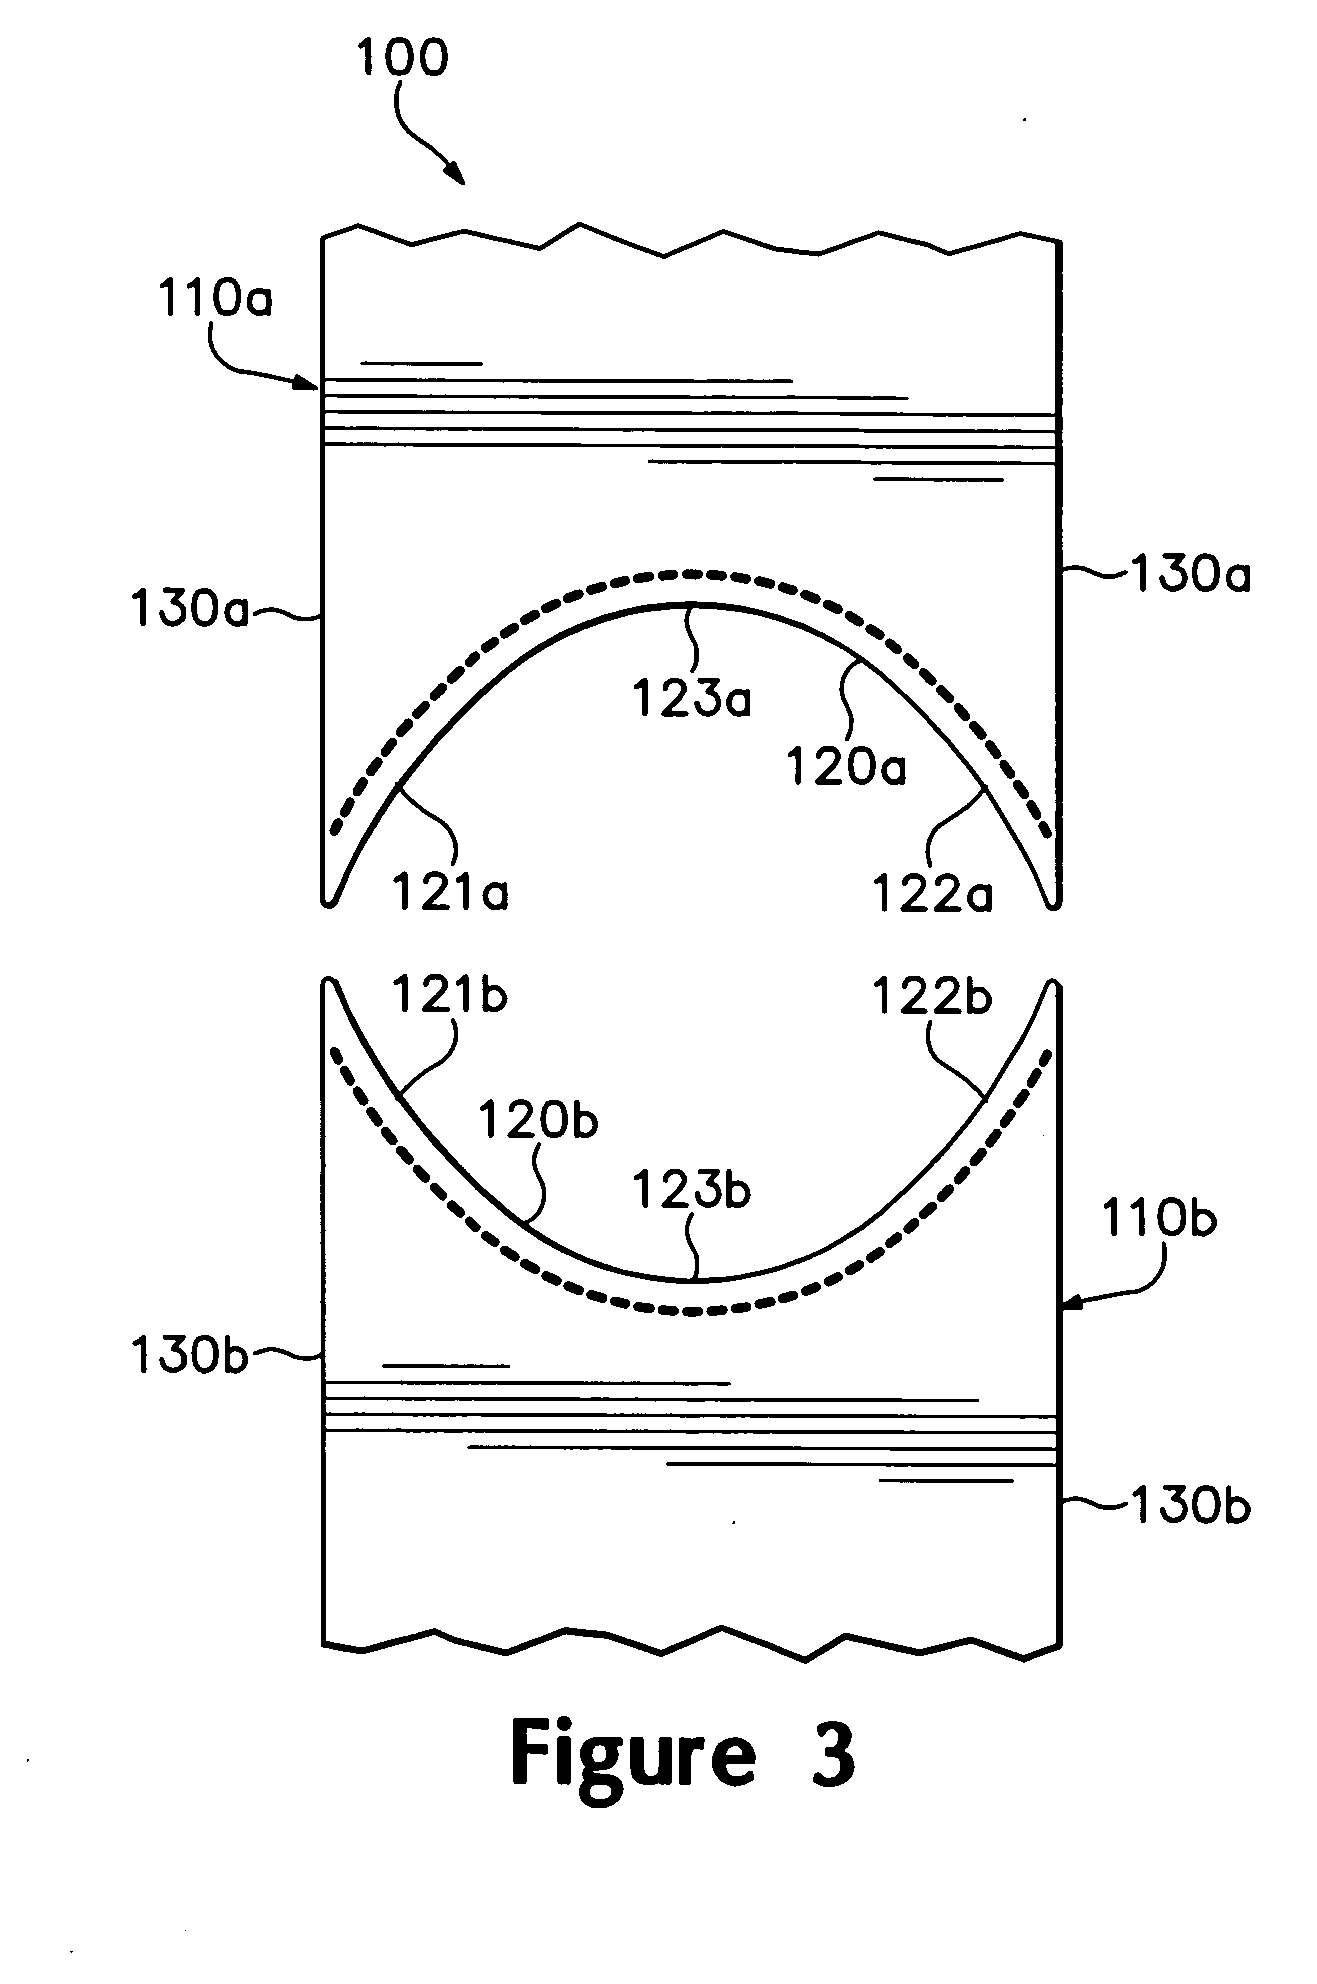 Overlapping element